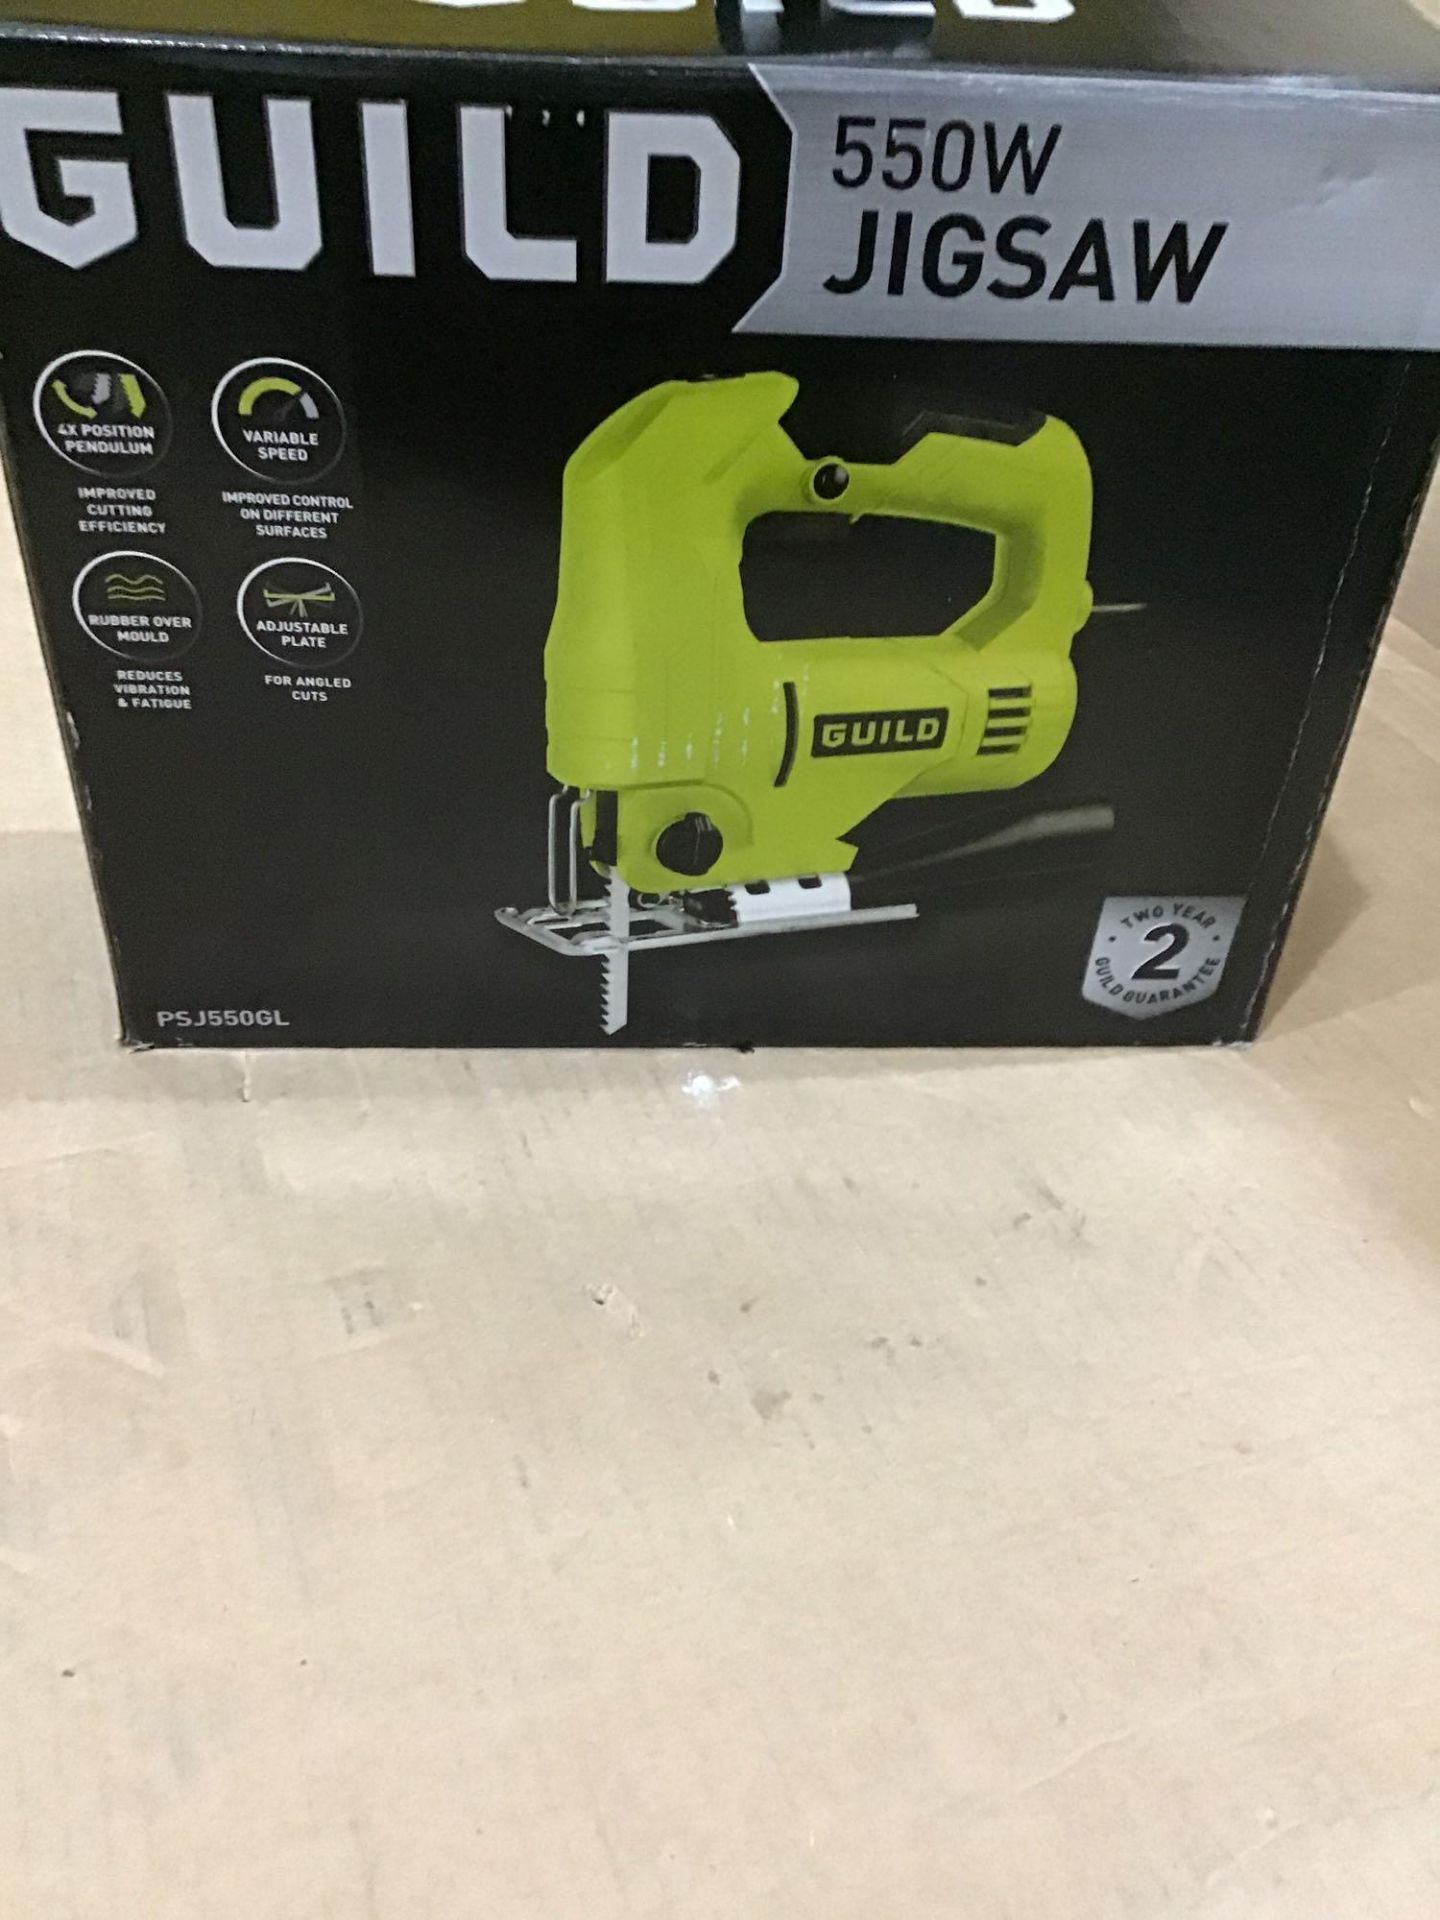 Guild Variable Speed Jigsaw - 550W 455/3515 £20.00 RRP - Image 5 of 5